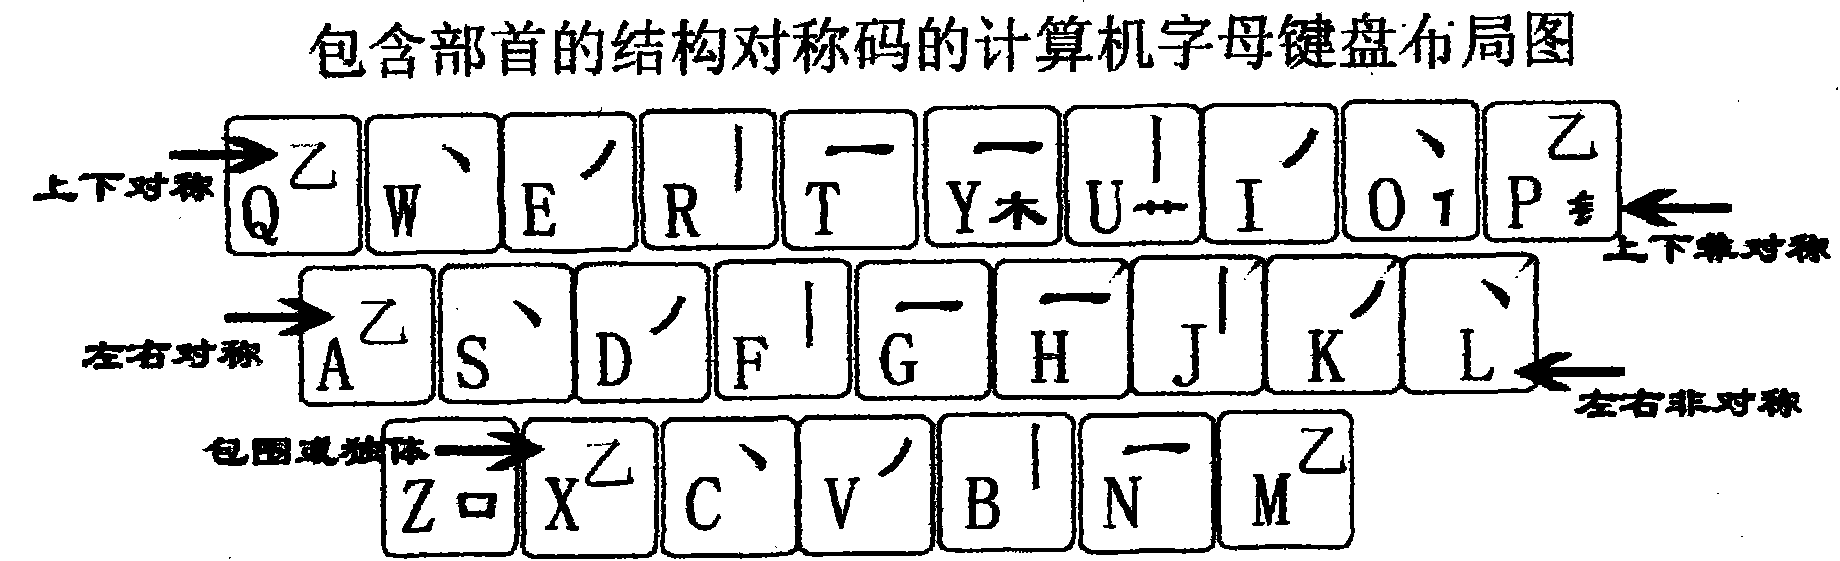 Method for inputting Chinese characters through alphabetic keyboard of computer